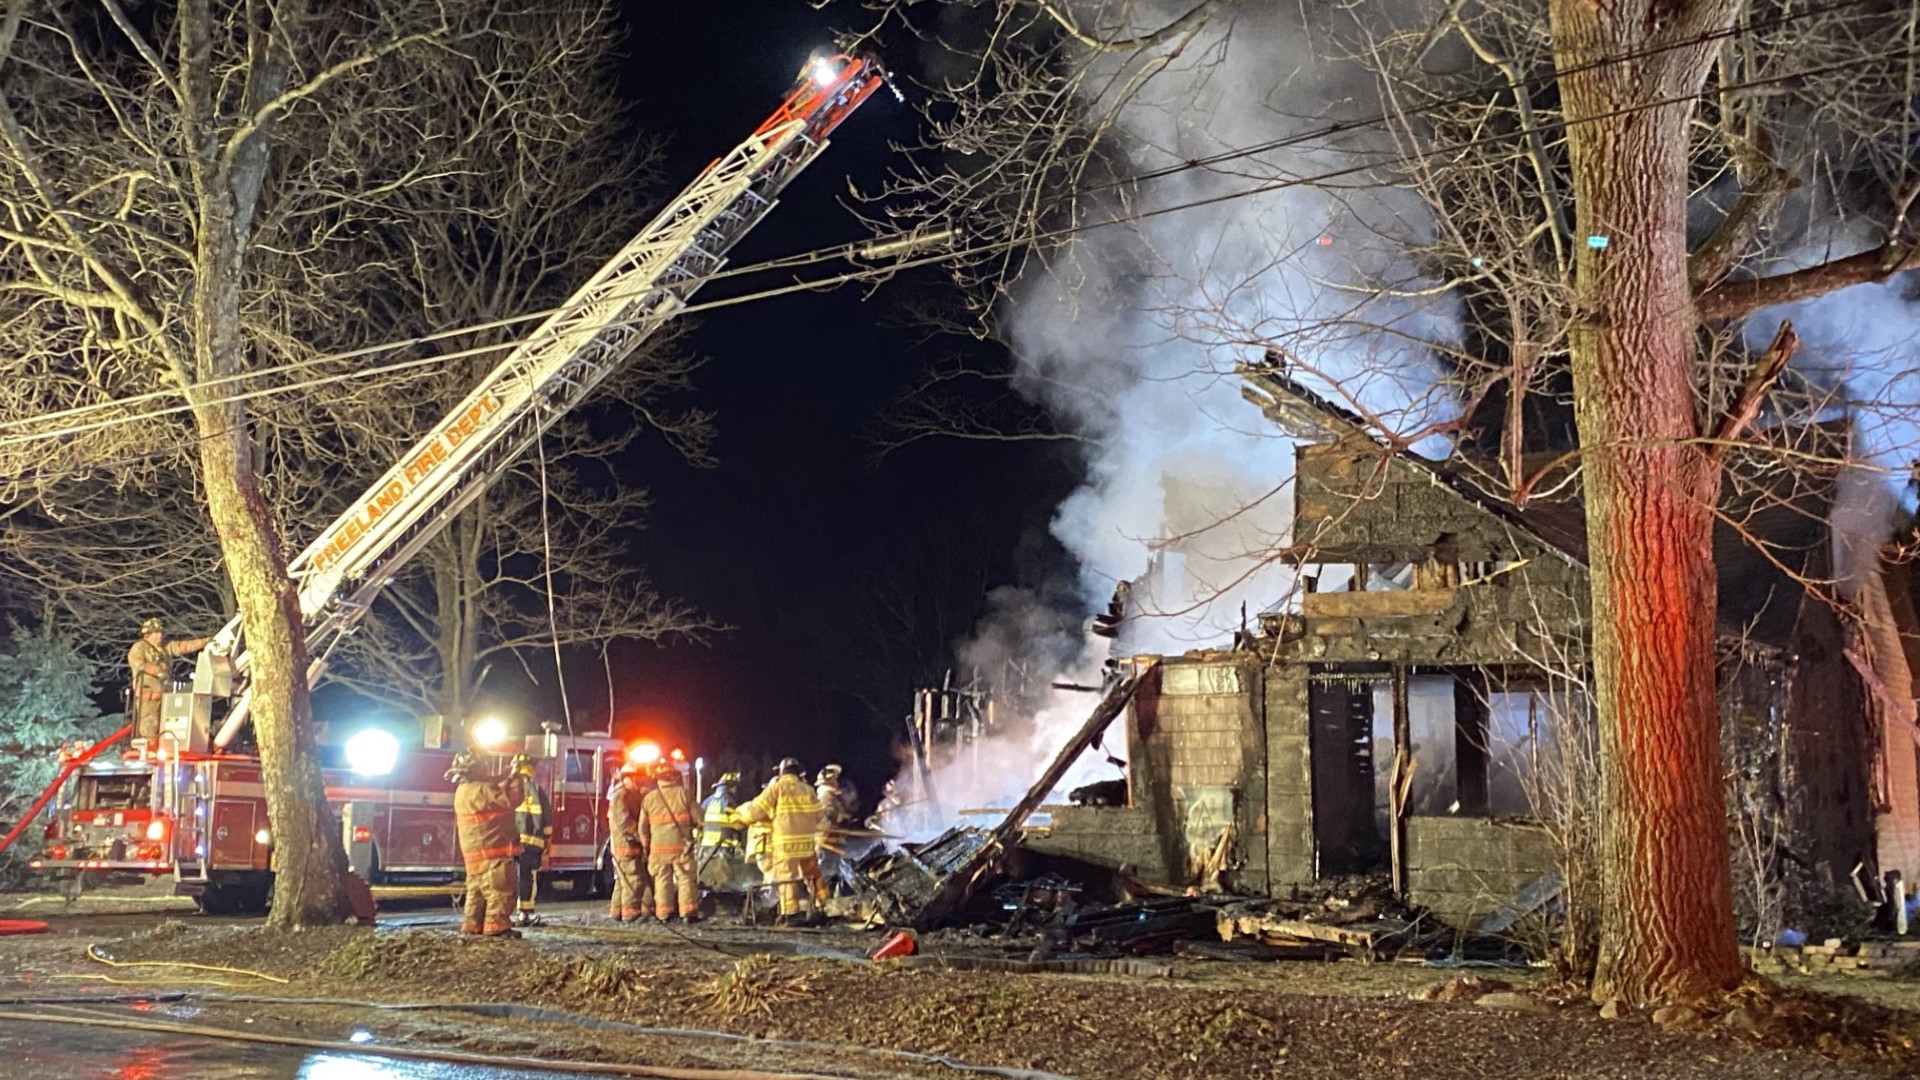 Crews were called to a fire at a home along Buck Mountain Road in Lausanne Township, near Weatherly, around 3:30 a.m. Monday.